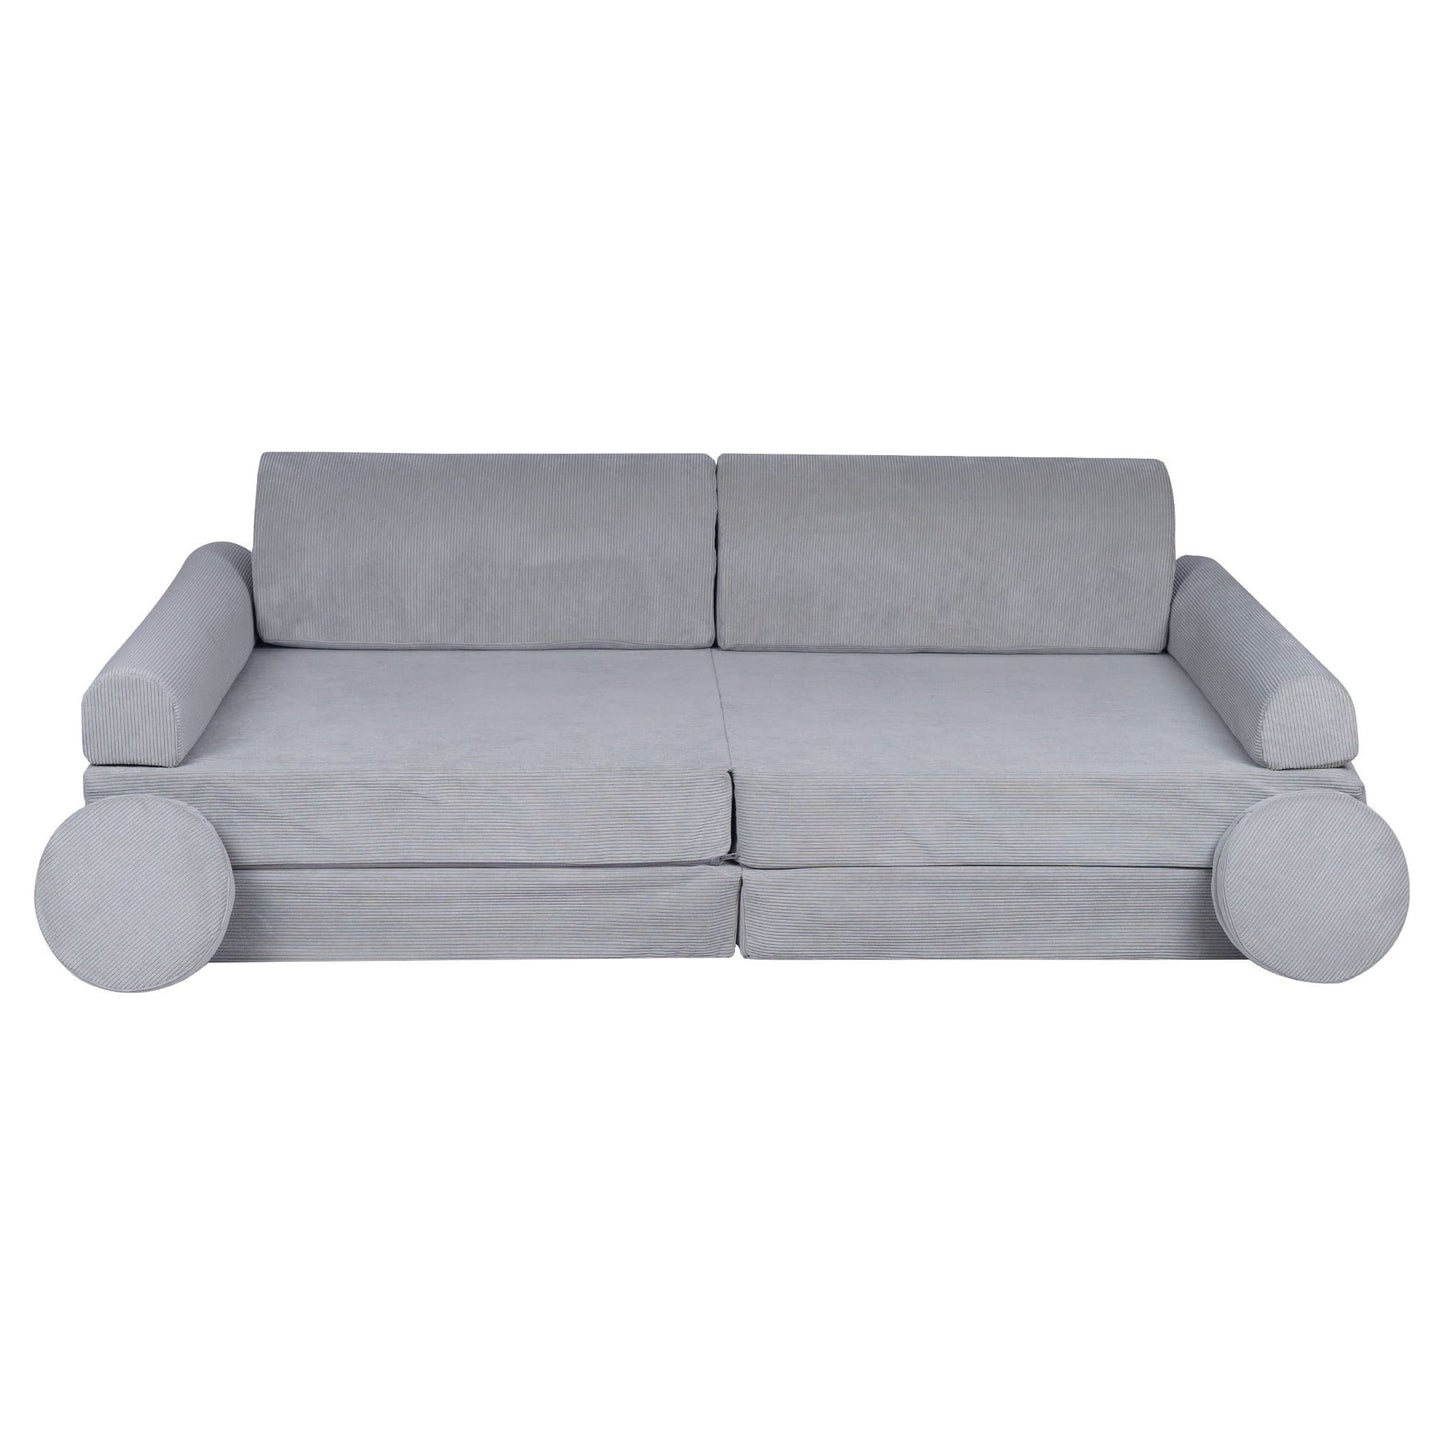 MeowBaby Kids Soft Play Sofa & Fold Out Bed - Corduroy Grey